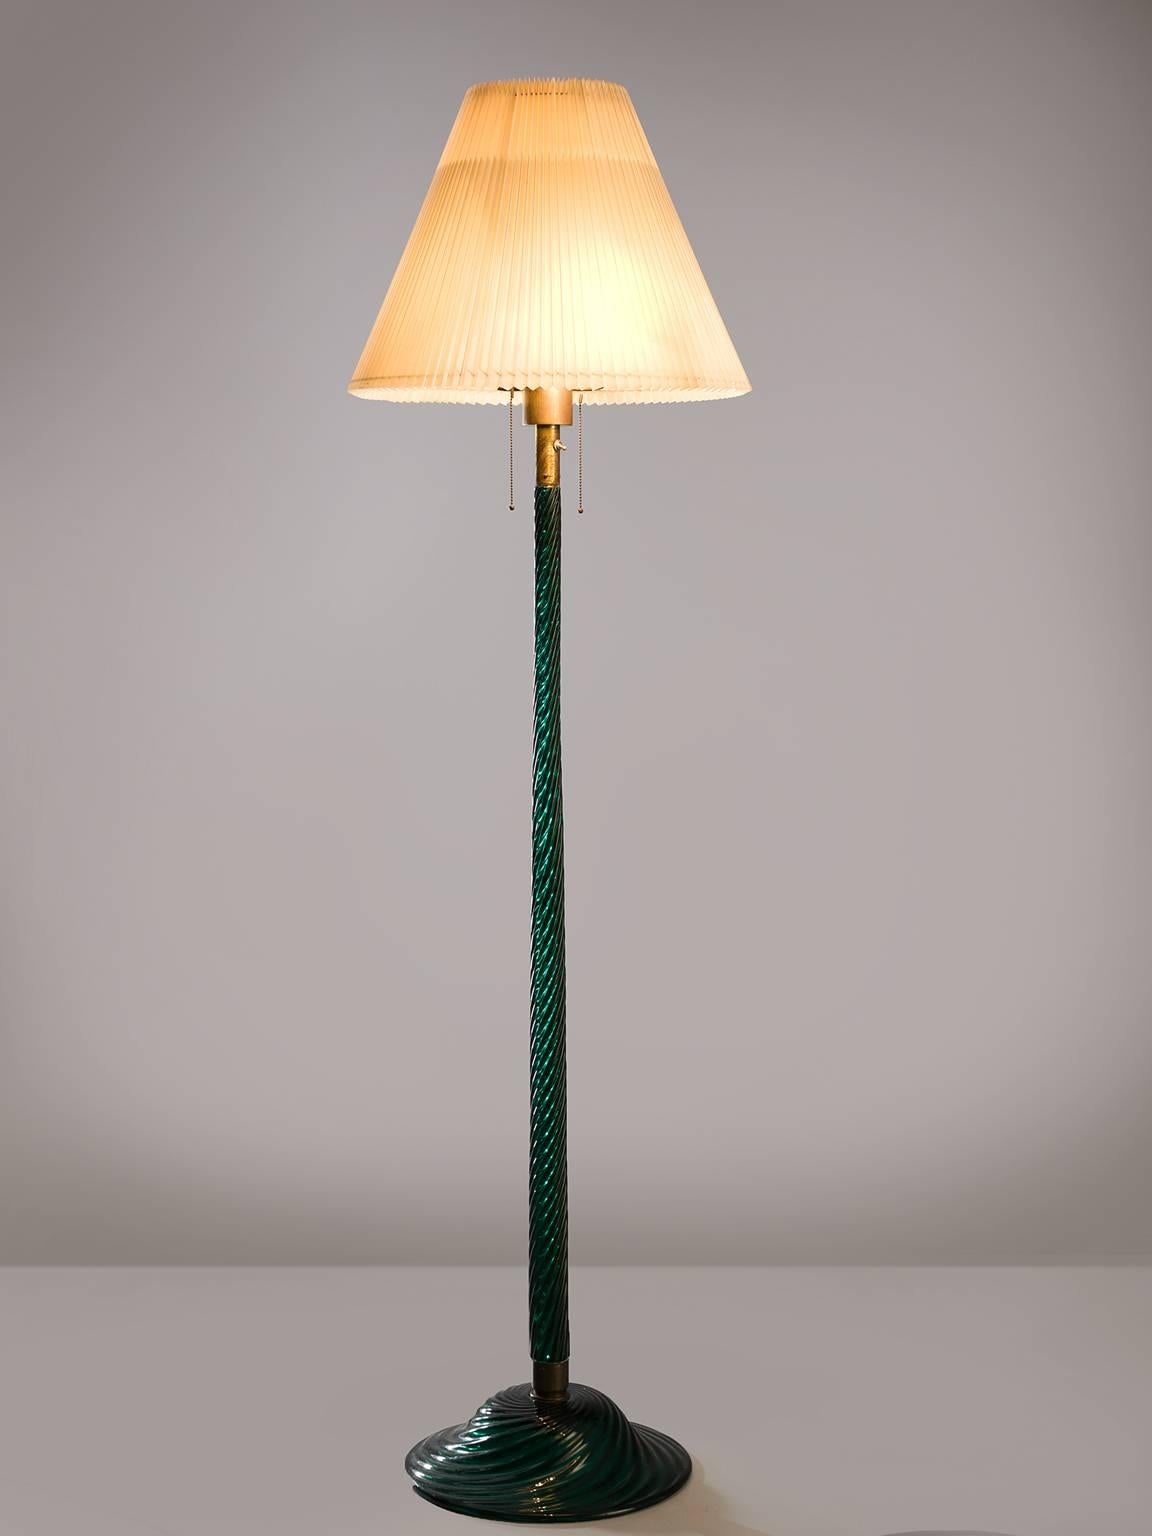 Venini floor lamp, glass, Italy, design 1934, production later.

This Classic floor lamp is executed in a wonderful clear color. The lamp has a ribbed, 'costelature' stem and base. Thanks to this artful skill this floor lamp is much more than a